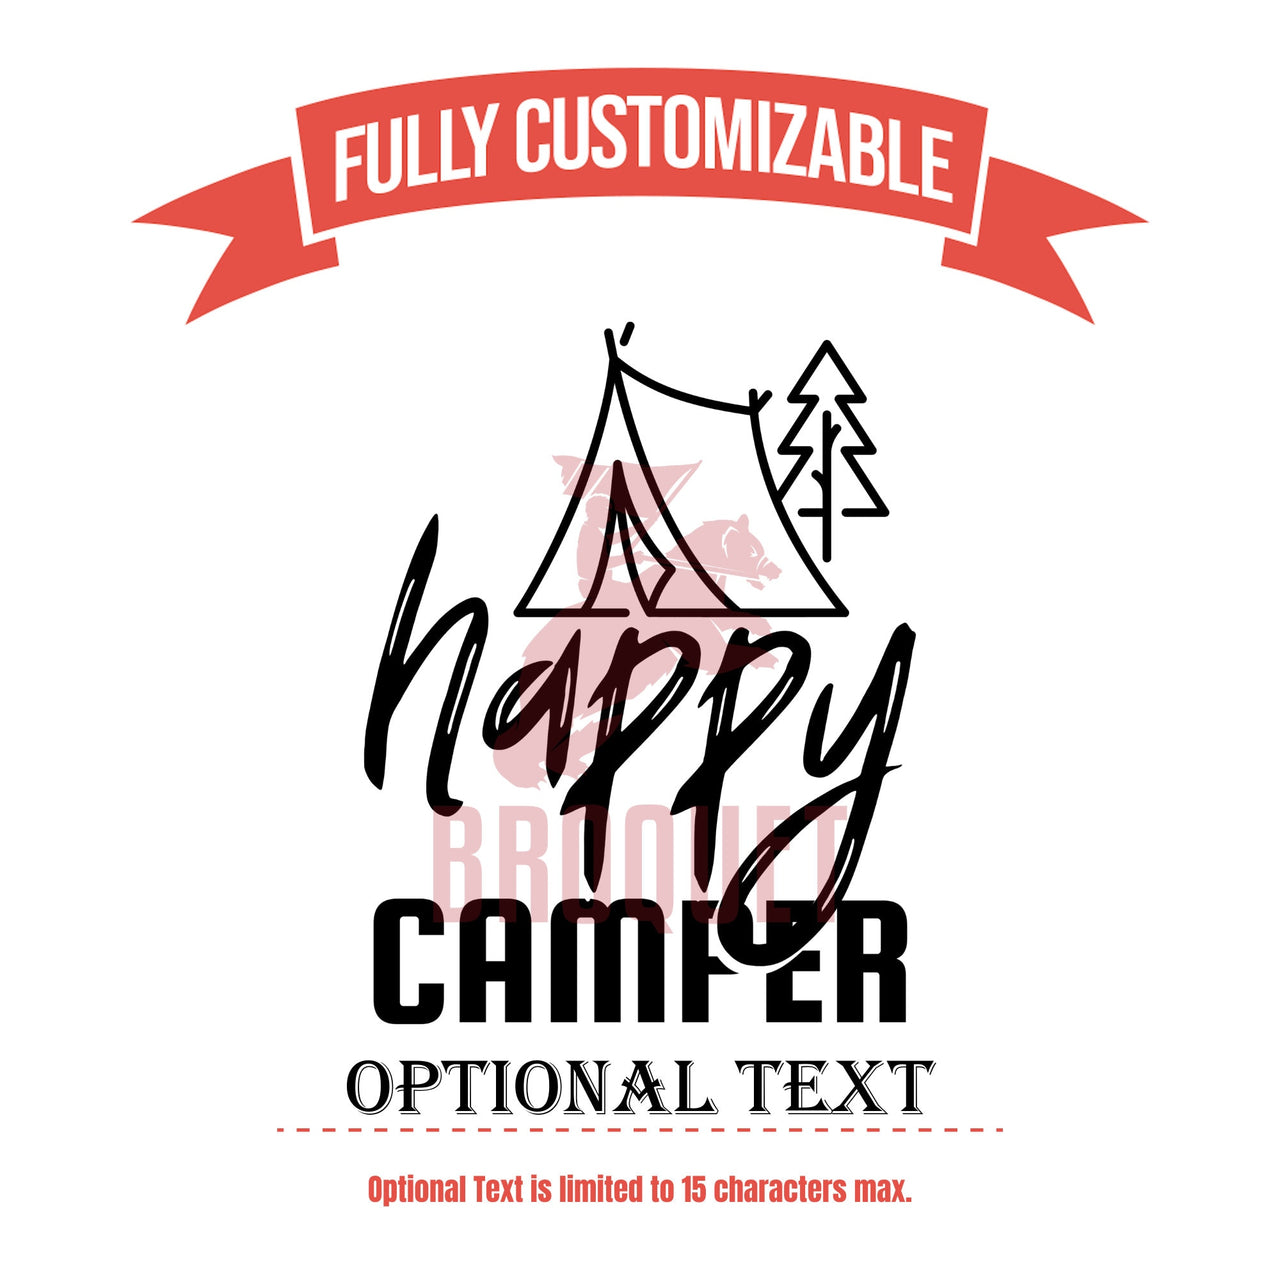 Happy Camper Unique Camping Gifts for Camper, Custom Whiskey Glass, Personalized 12 oz Bourbon Whiskey Glasses, Camp Engraved Monogram Glass